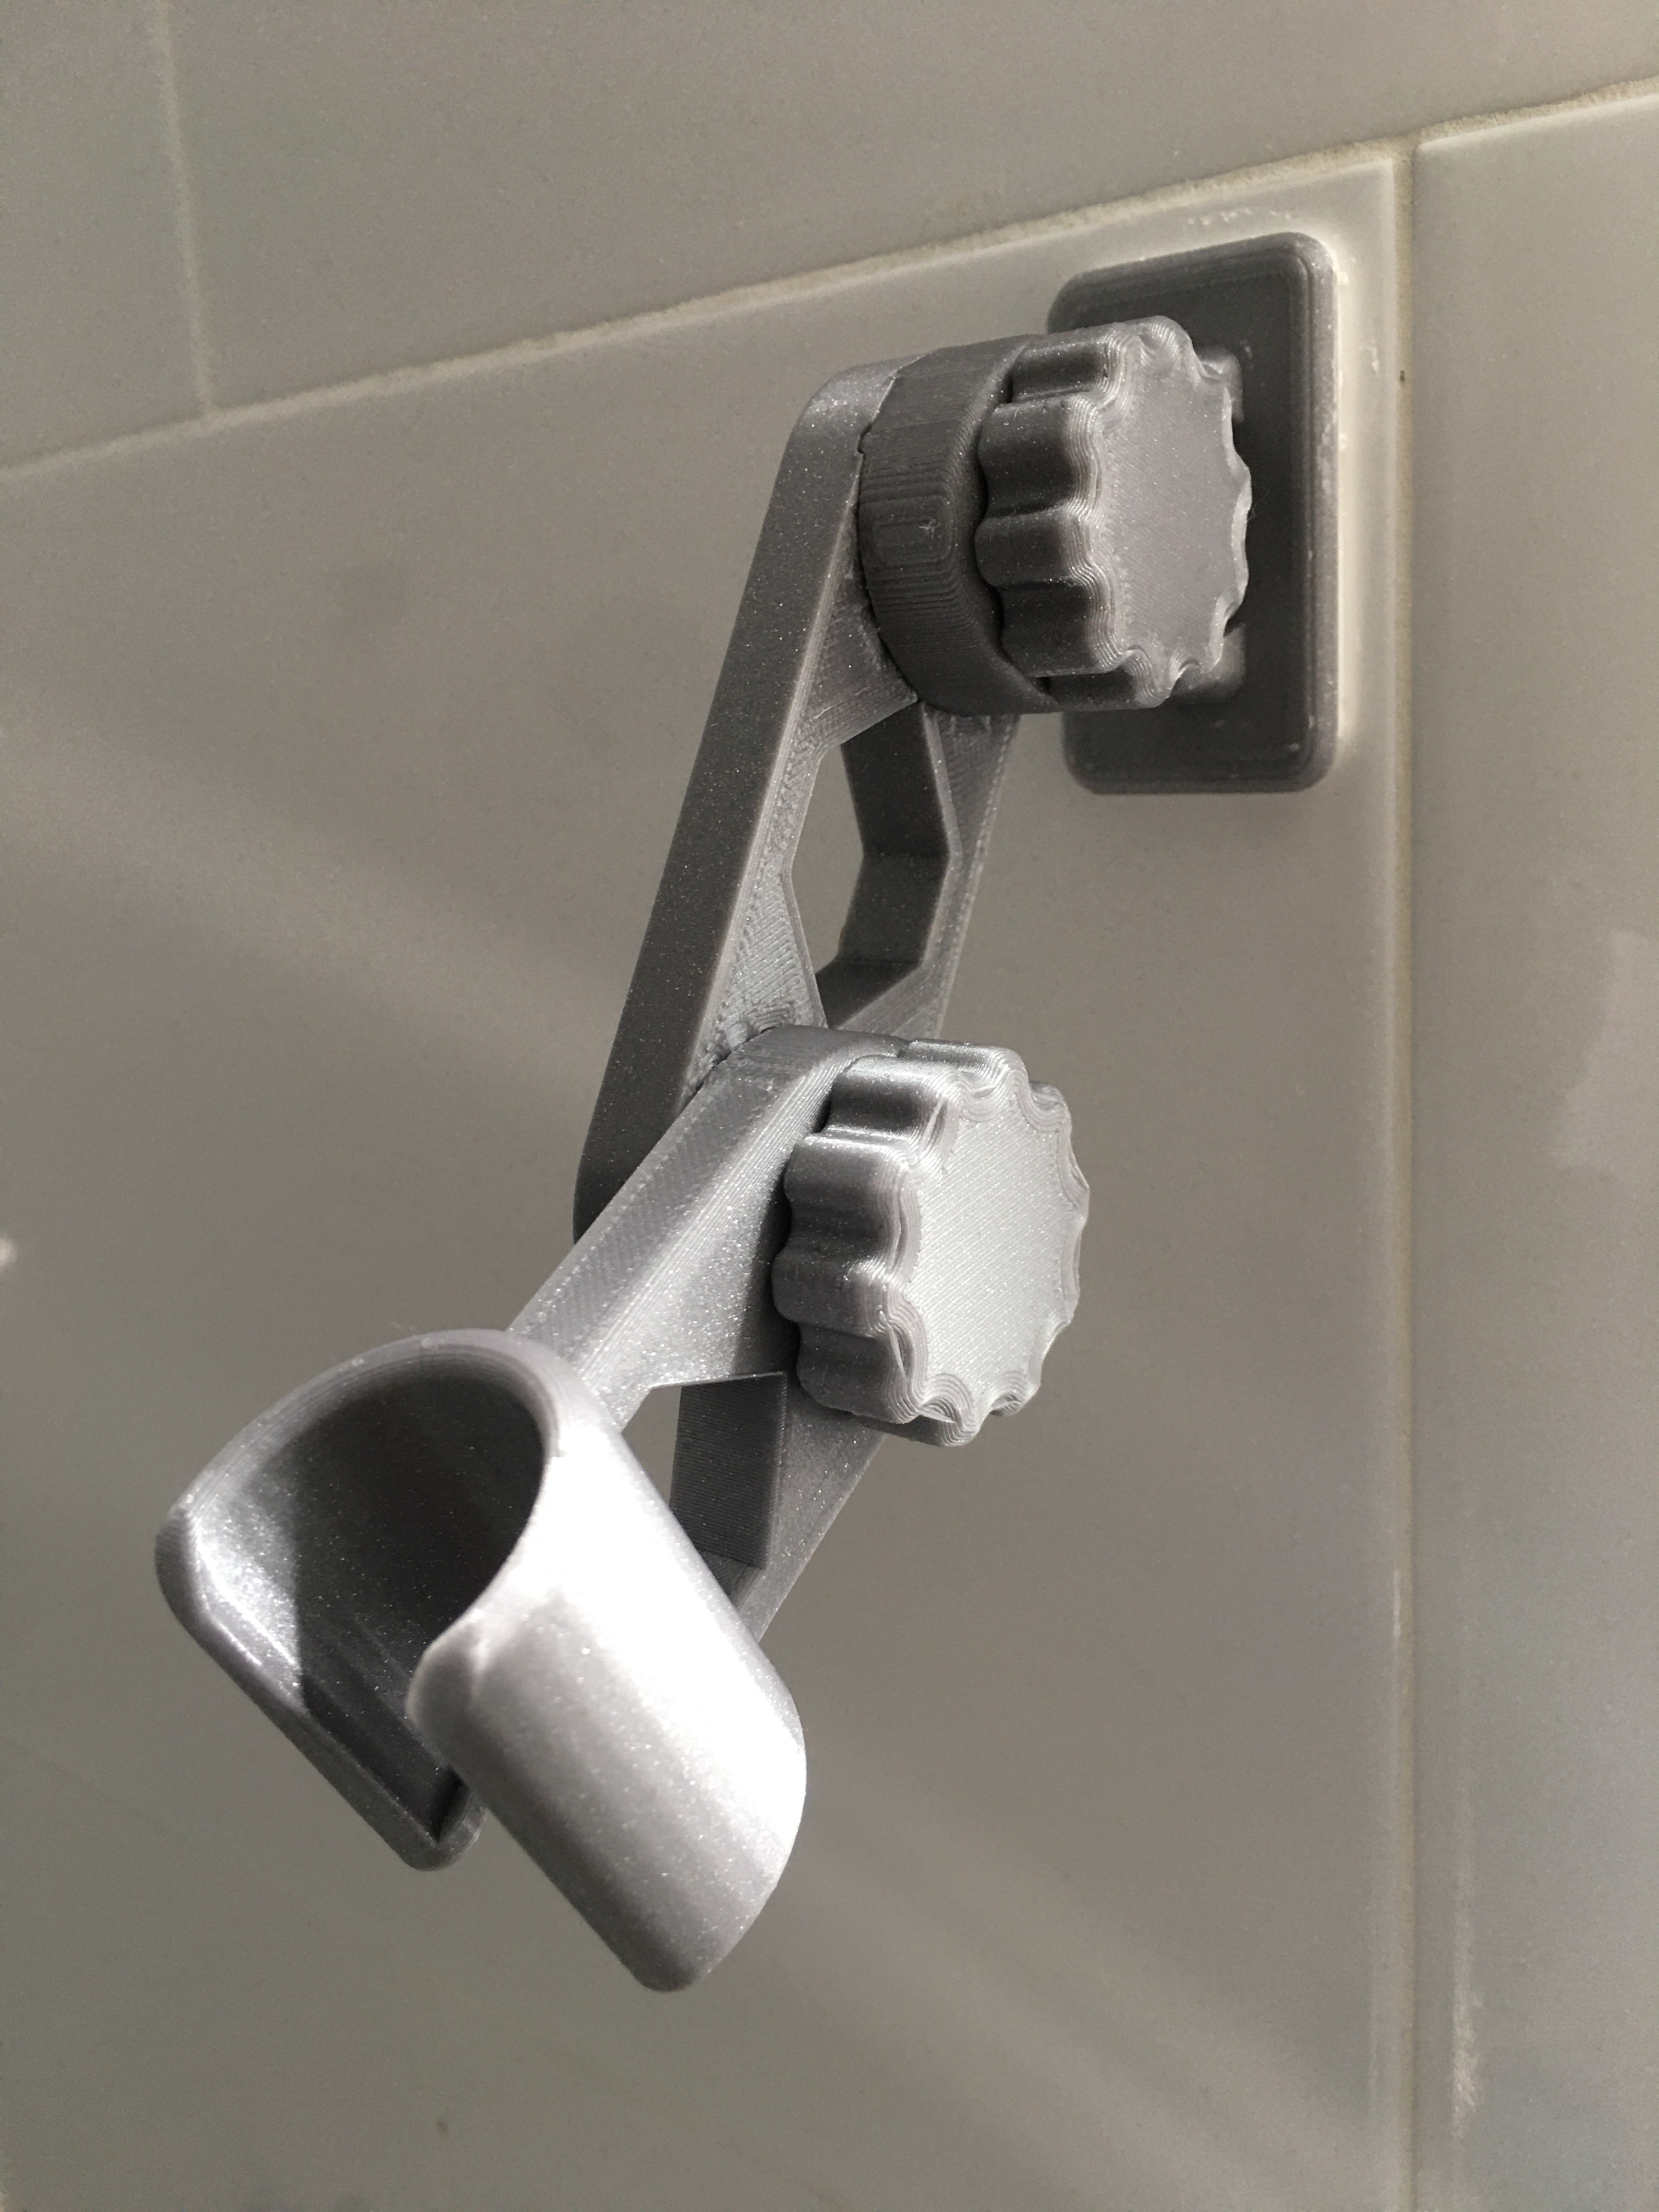 3D-printed articulating hand shower mount on the wall